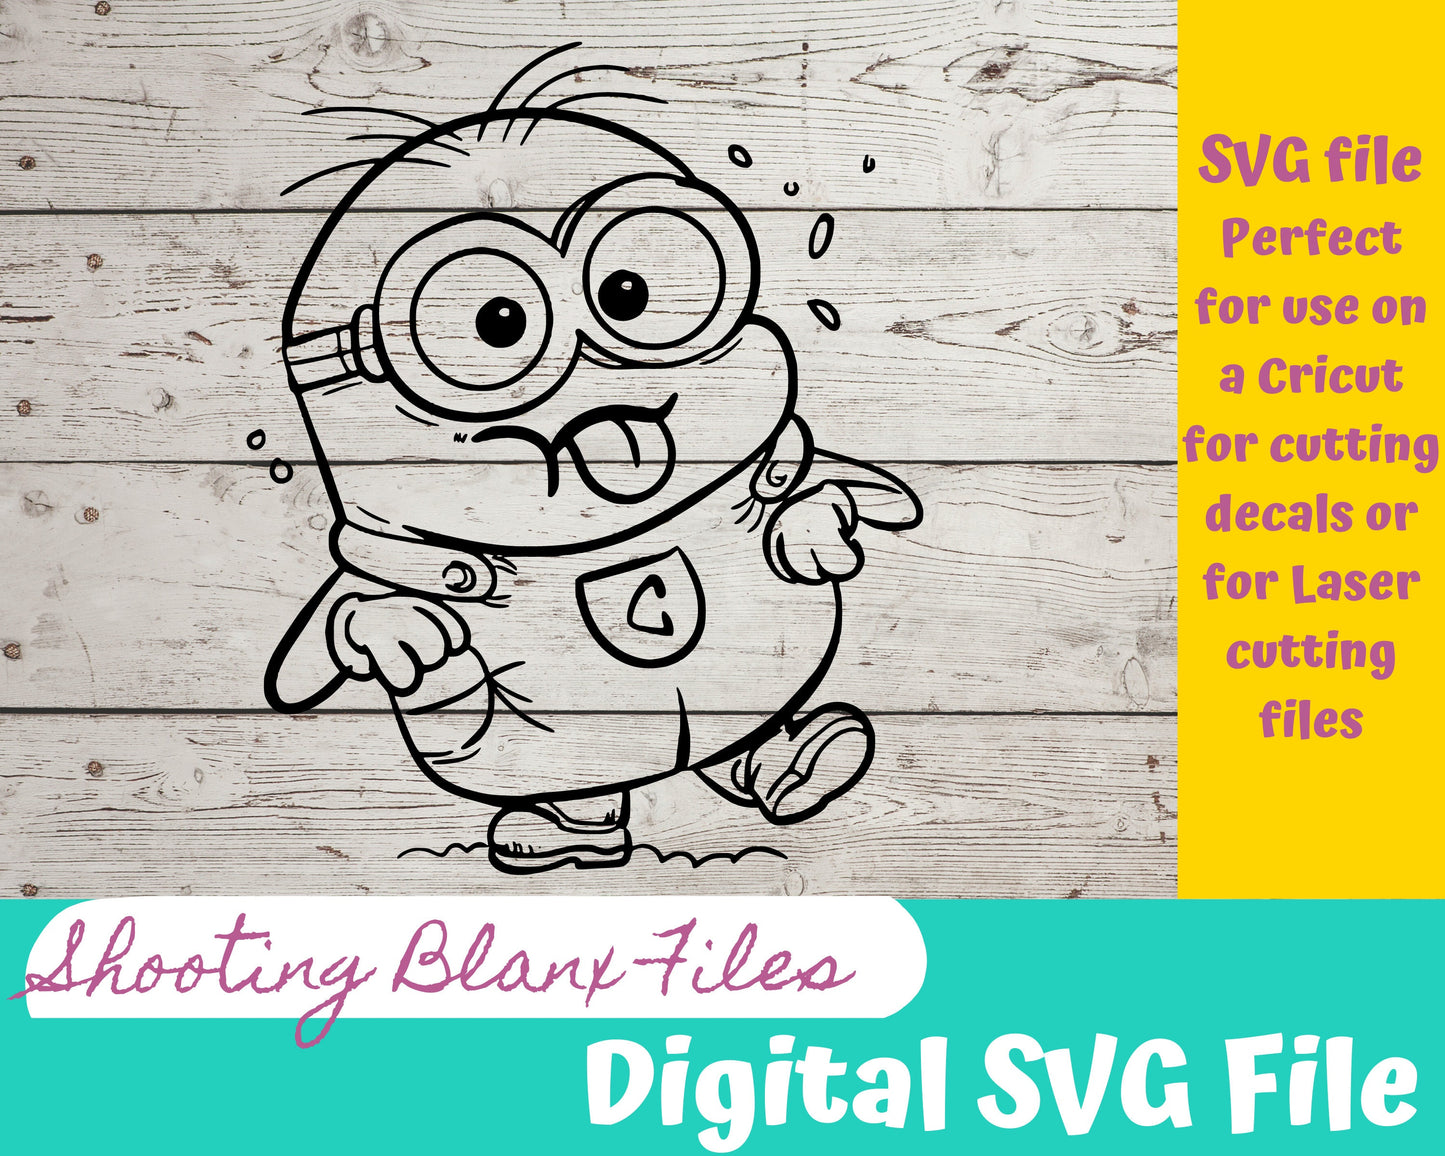 Yellow midget SVG file perfect for Cricut, Cameo, or Silhouette also for laser engraving Glowforge, Cartoon, Banana